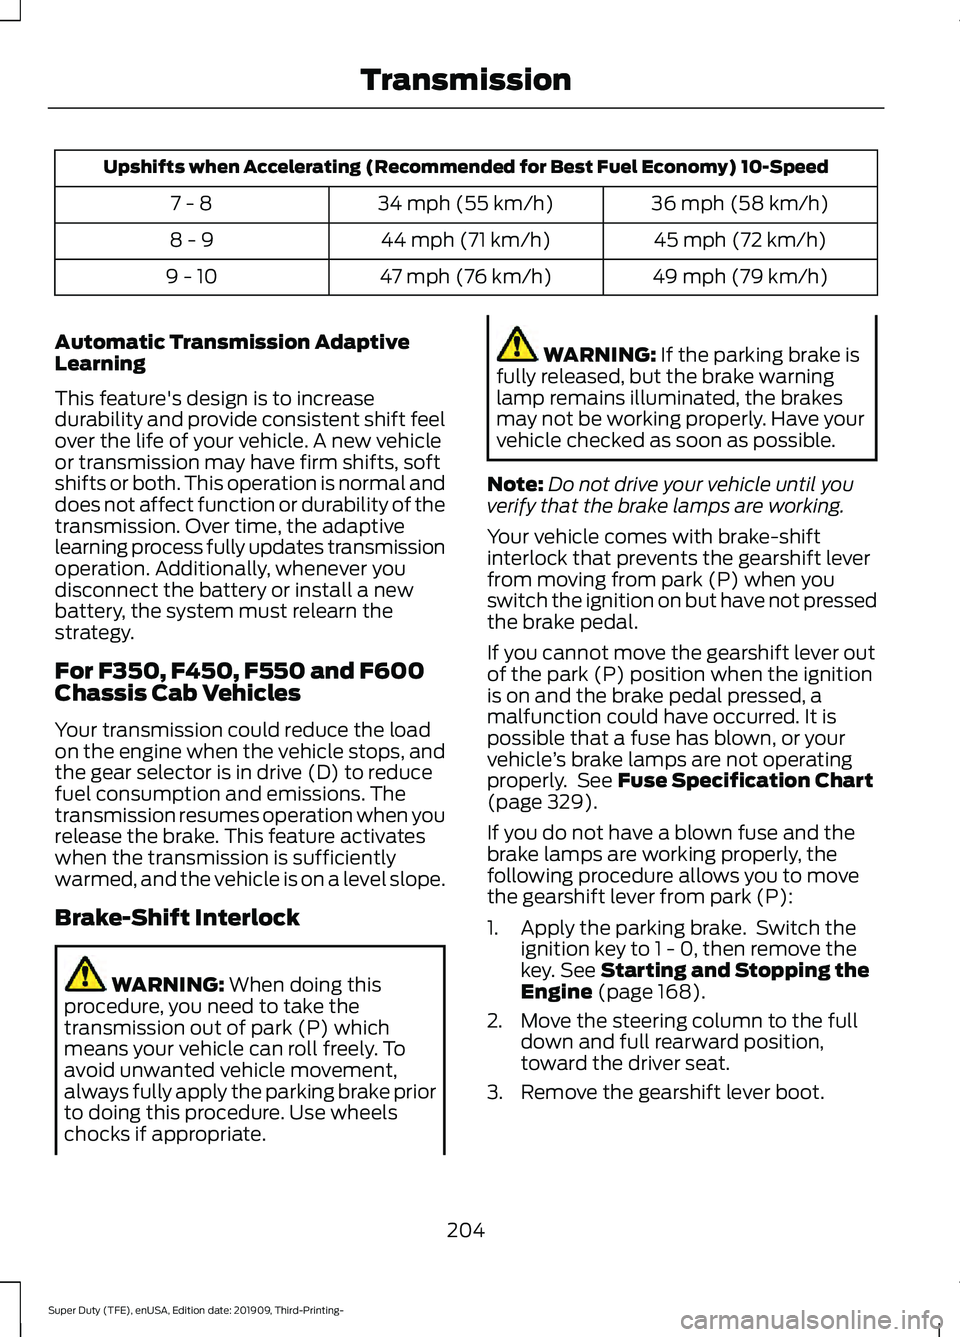 FORD F-550 2020  Owners Manual Upshifts when Accelerating (Recommended for Best Fuel Economy) 10-Speed
36 mph (58 km/h)
34 mph (55 km/h)
7 - 8
45 mph (72 km/h)
44 mph (71 km/h)
8 - 9
49 mph (79 km/h)
47 mph (76 km/h)
9 - 10
Automat